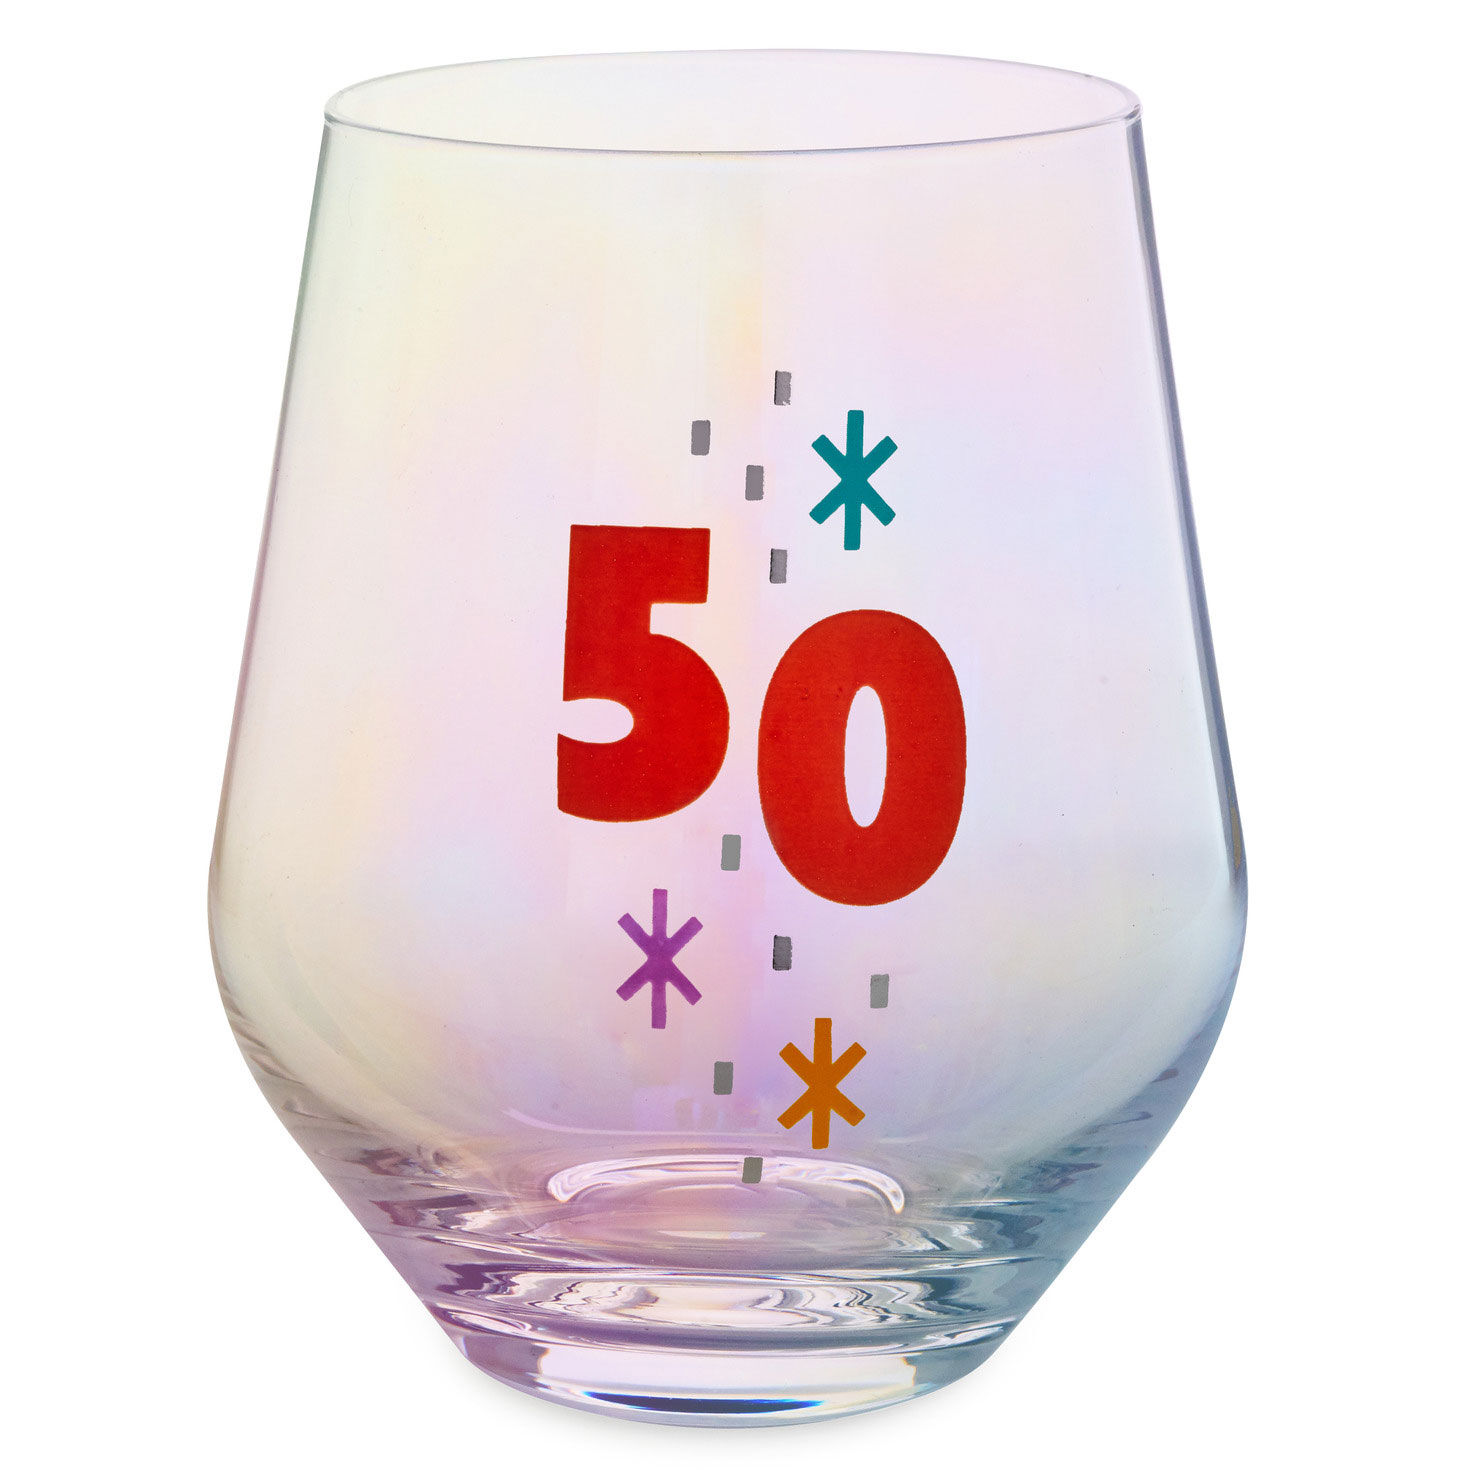 Personalised Hand Painted wine glass birthday gift birthday 30th 21st 50th 18 16 